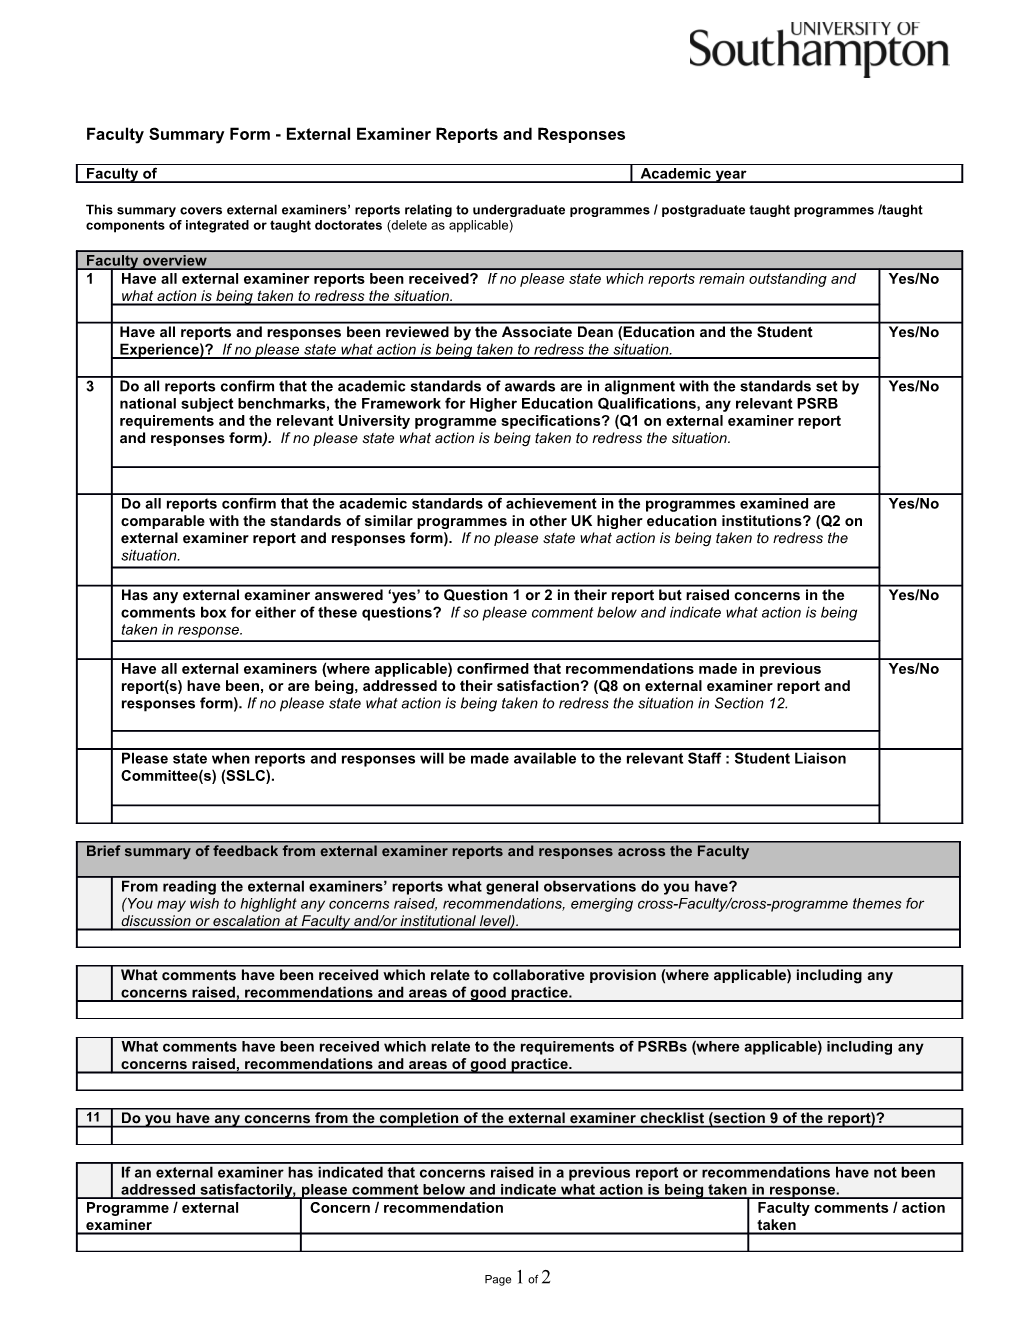 Template for Faculty Summary Report on Schools External Examiner Reports and Relevant Responses